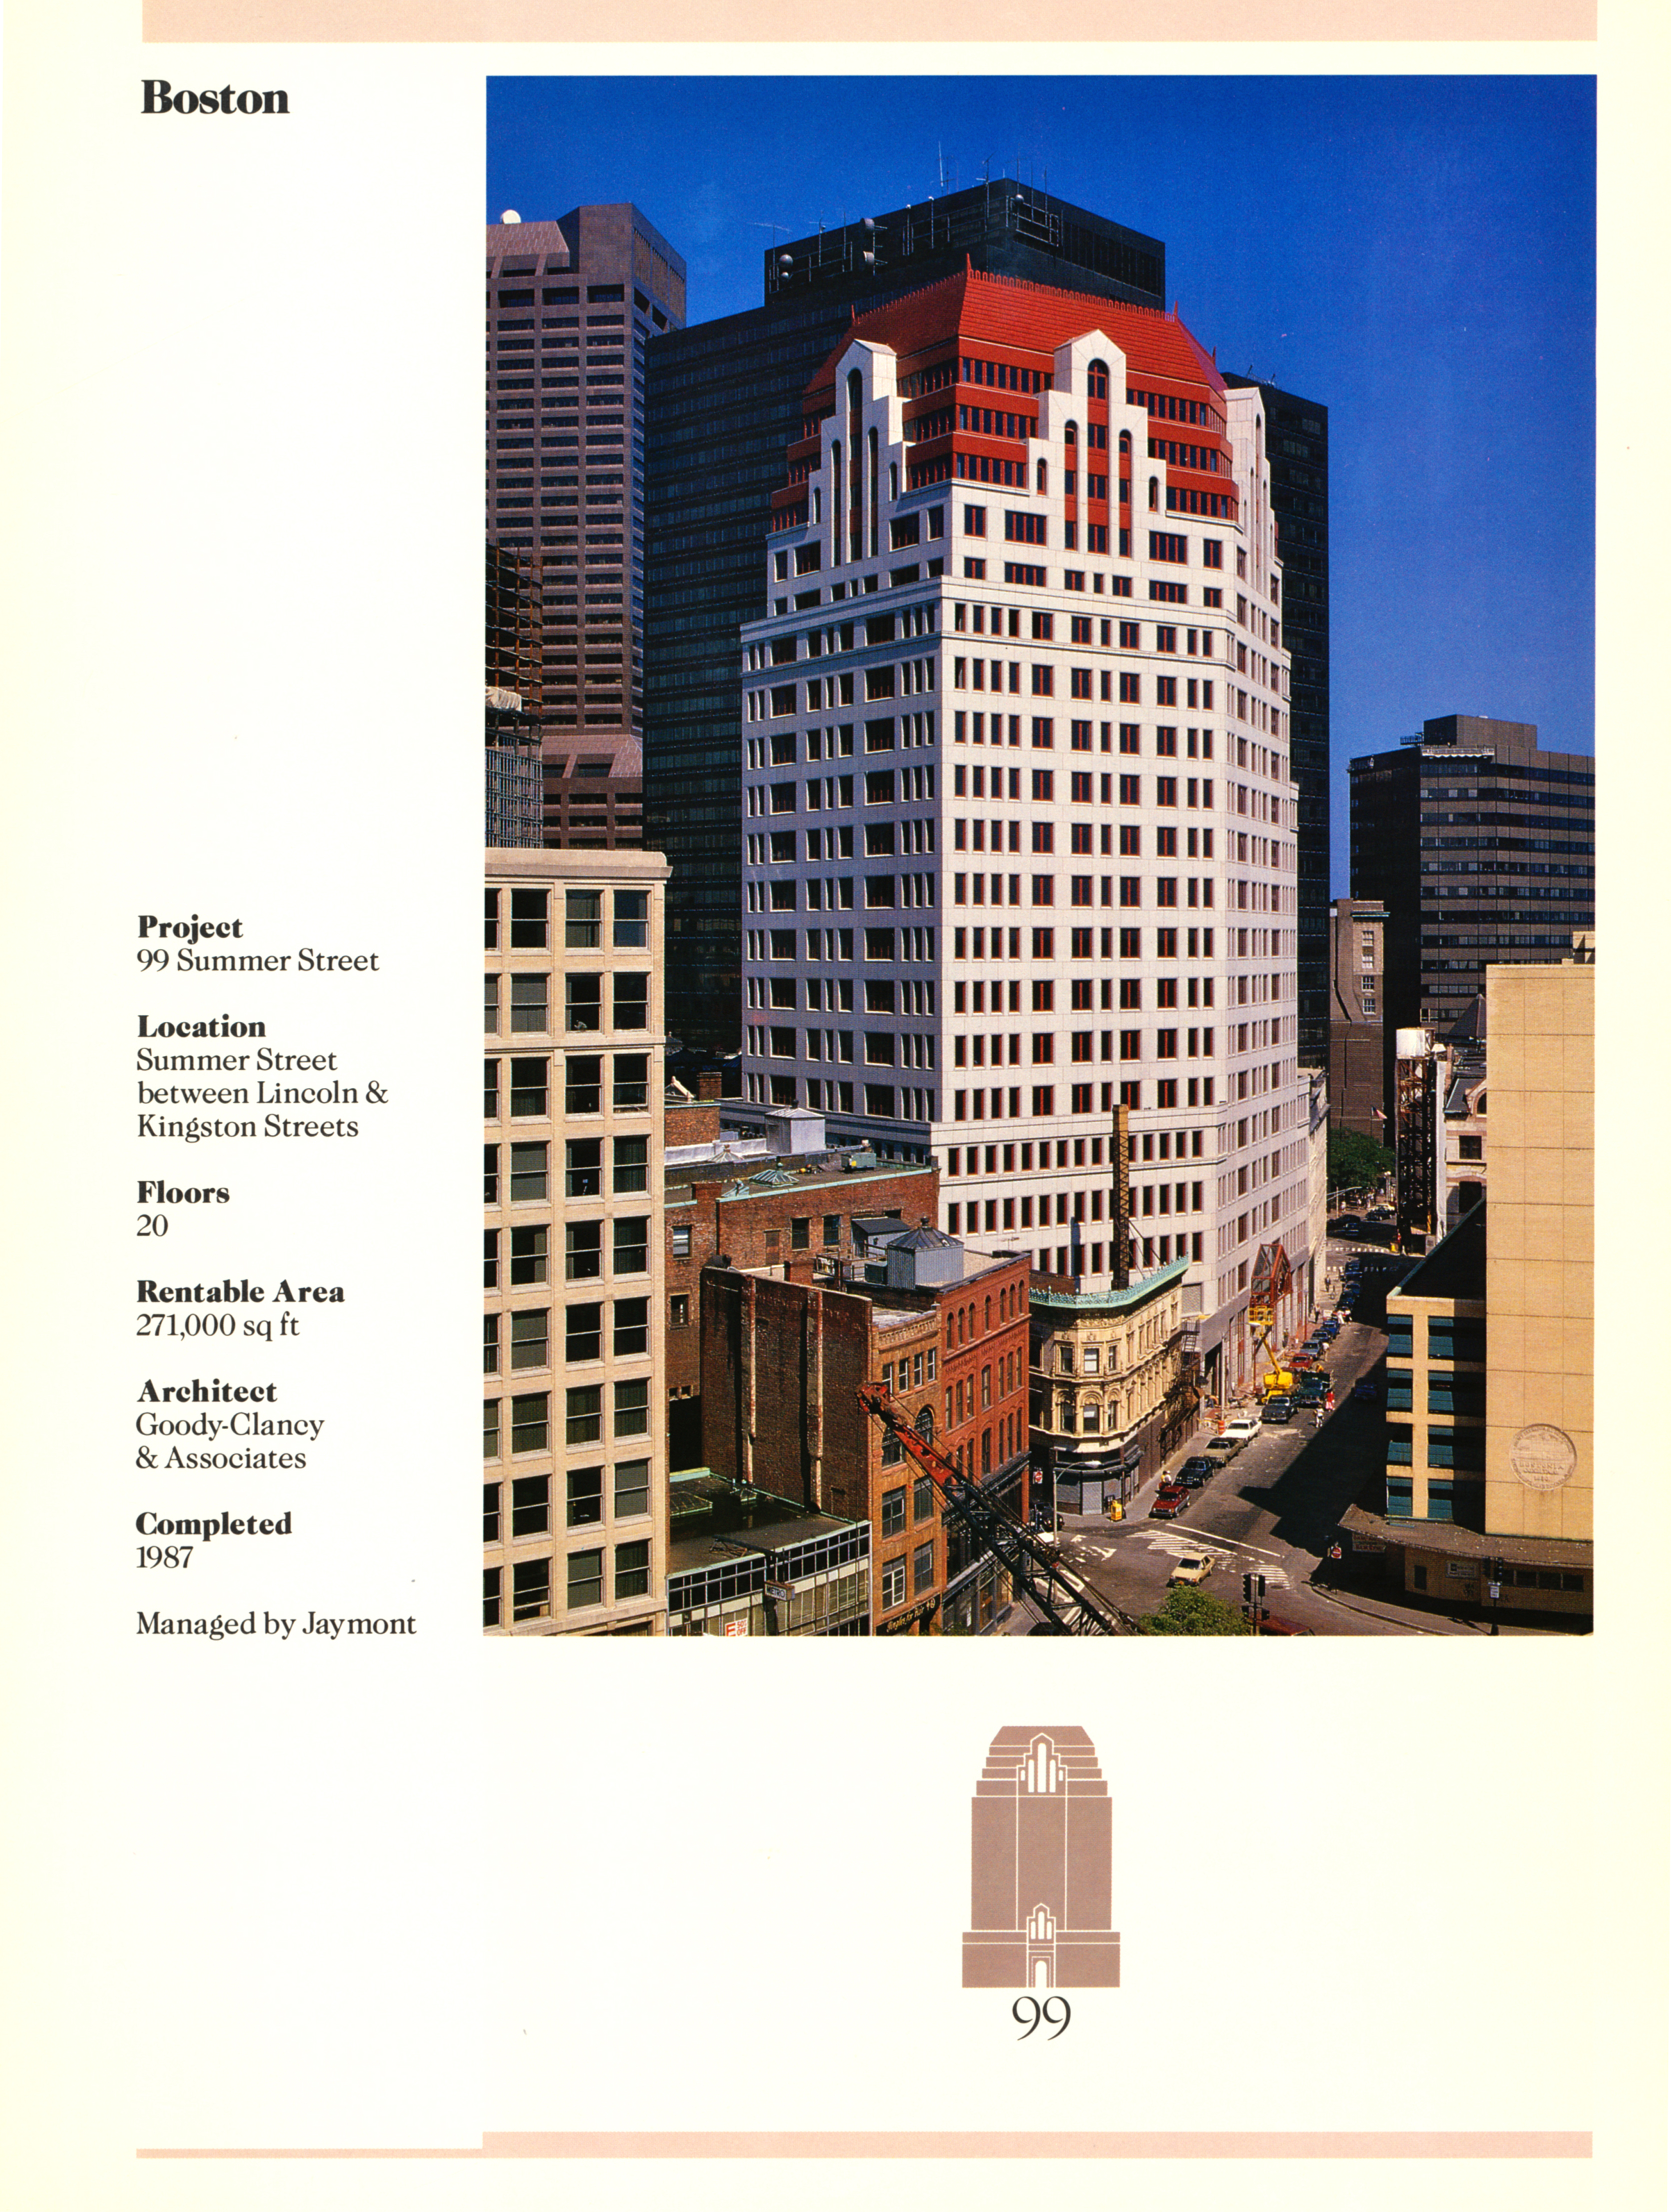 Fact sheet with large image and detailed stats for the building.